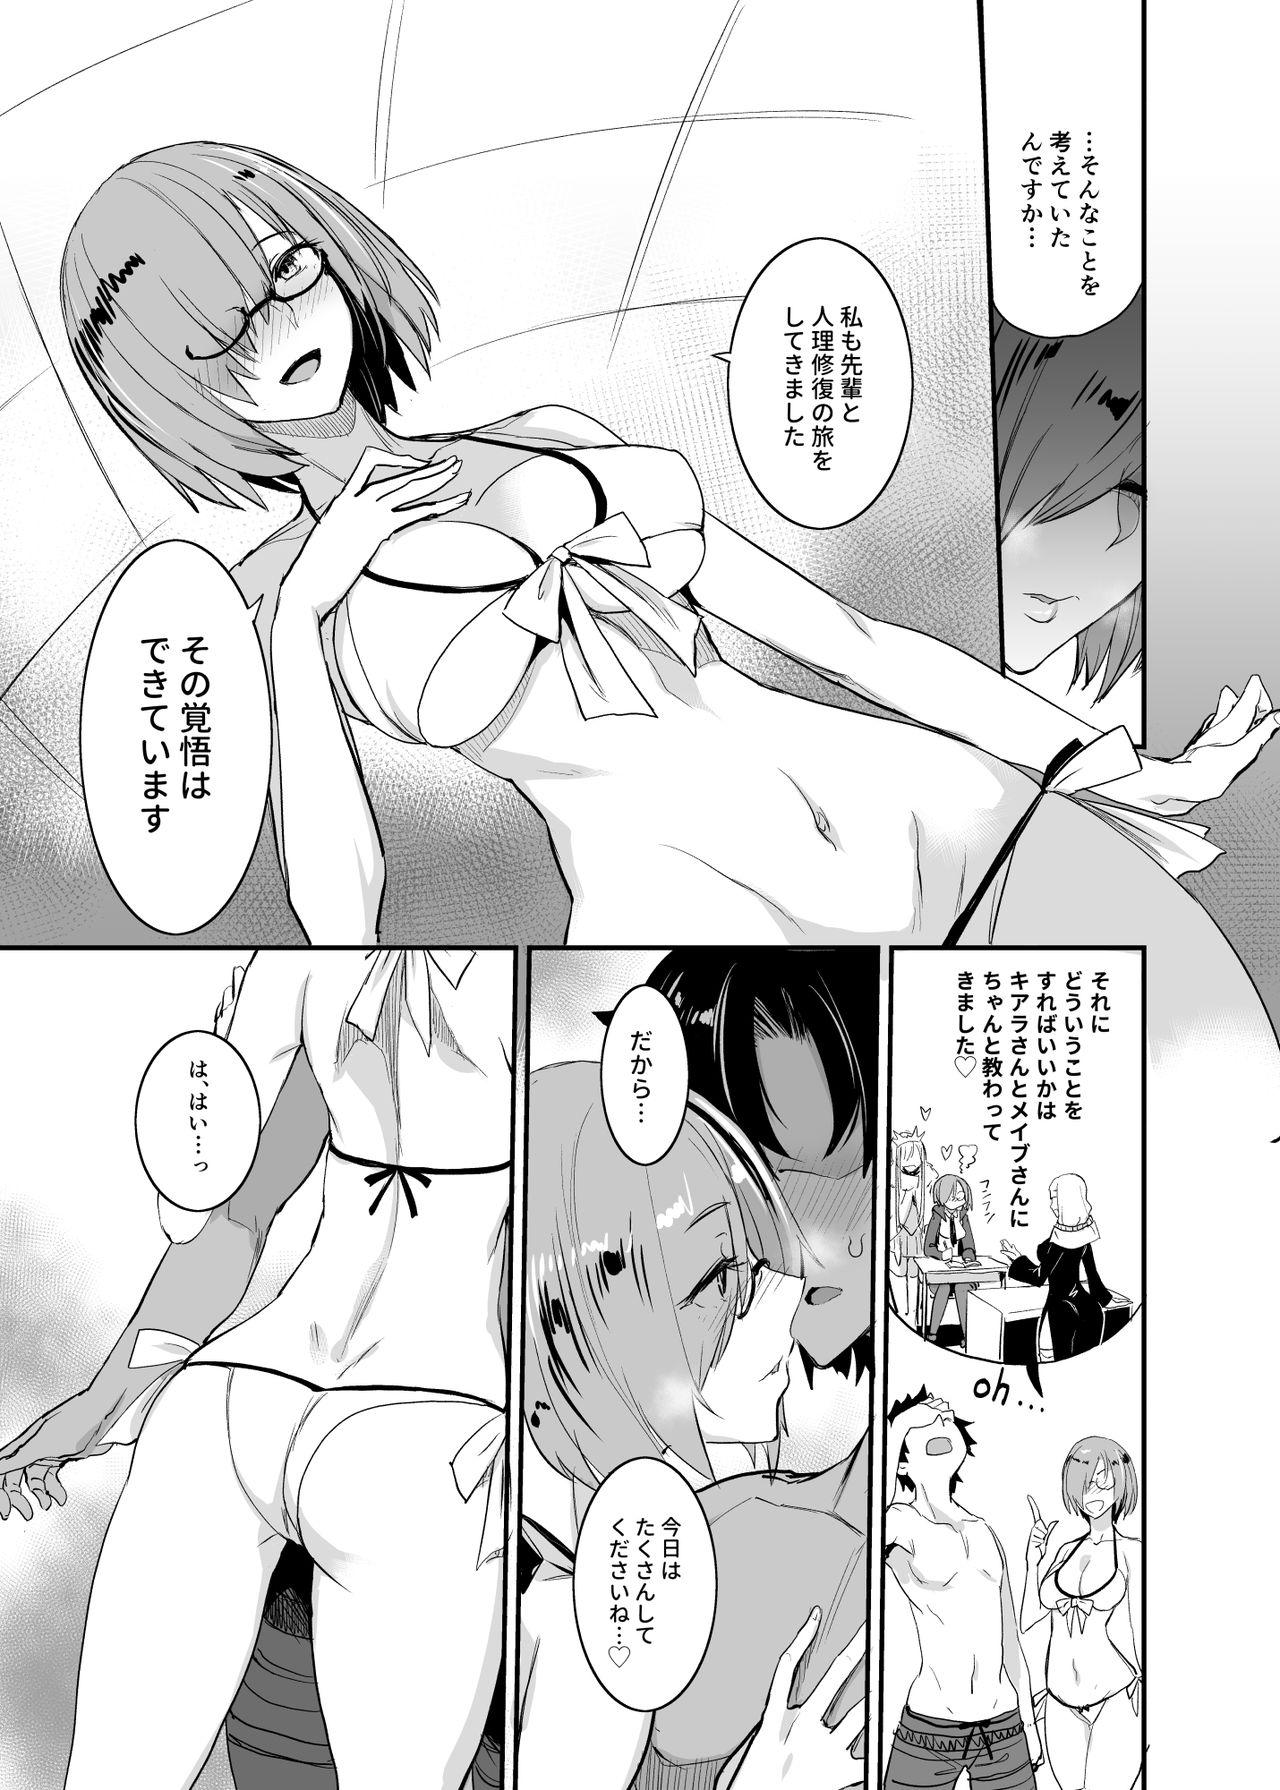 Married FGO no Erohon 4 - Fate grand order Picked Up - Page 9